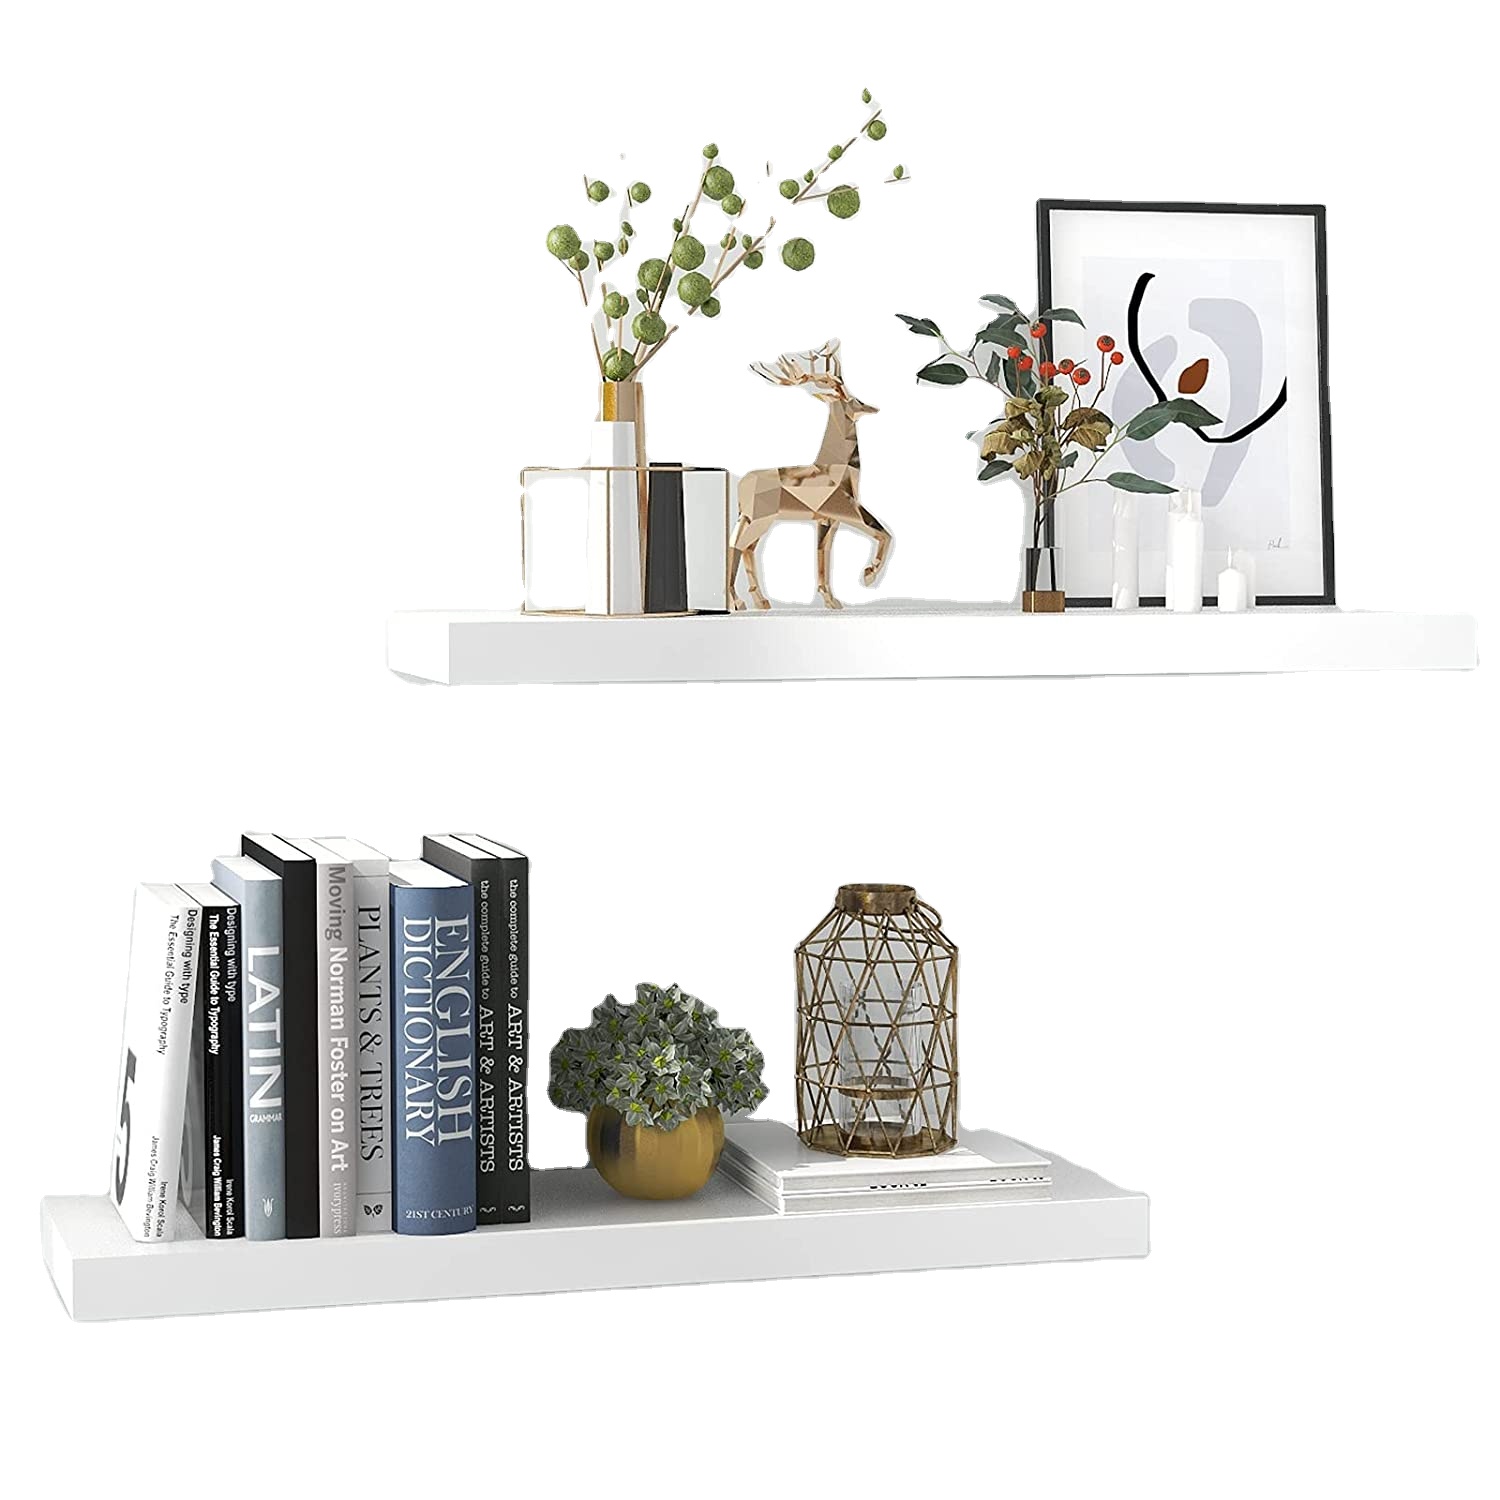 Picture Ledge Shelf  Wall Mounted Floating Shelves Display Storage Ledge for Home Kitchen Office Decoration